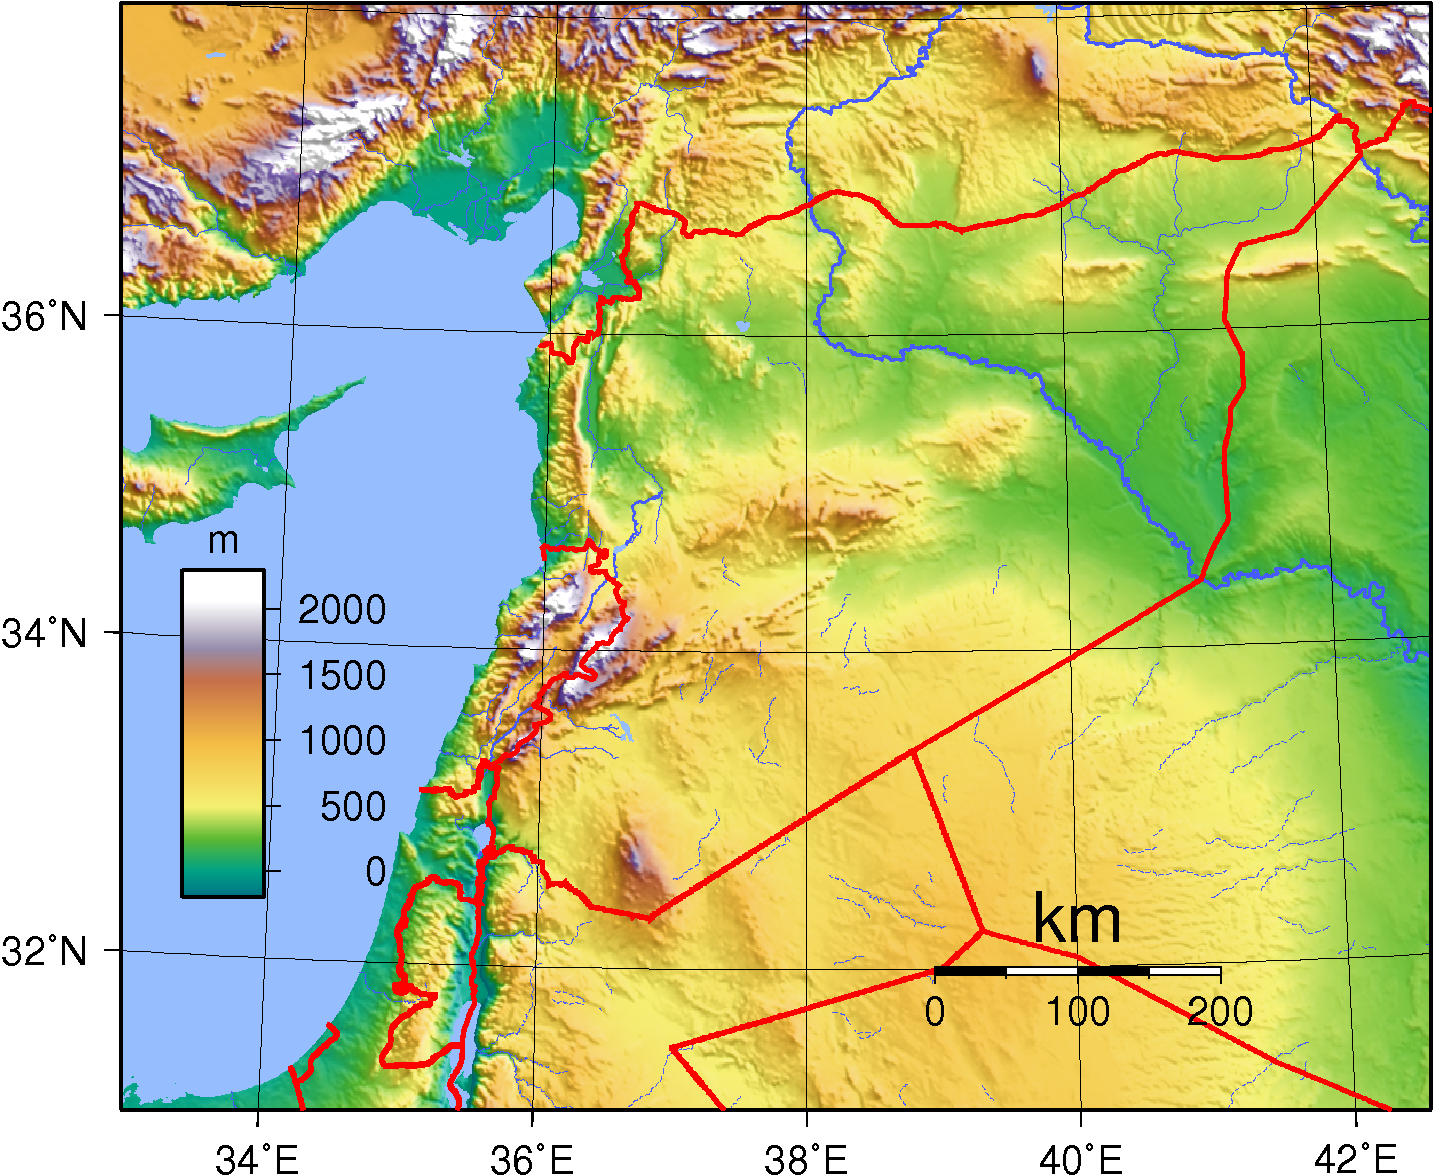 Syria_Topography.png